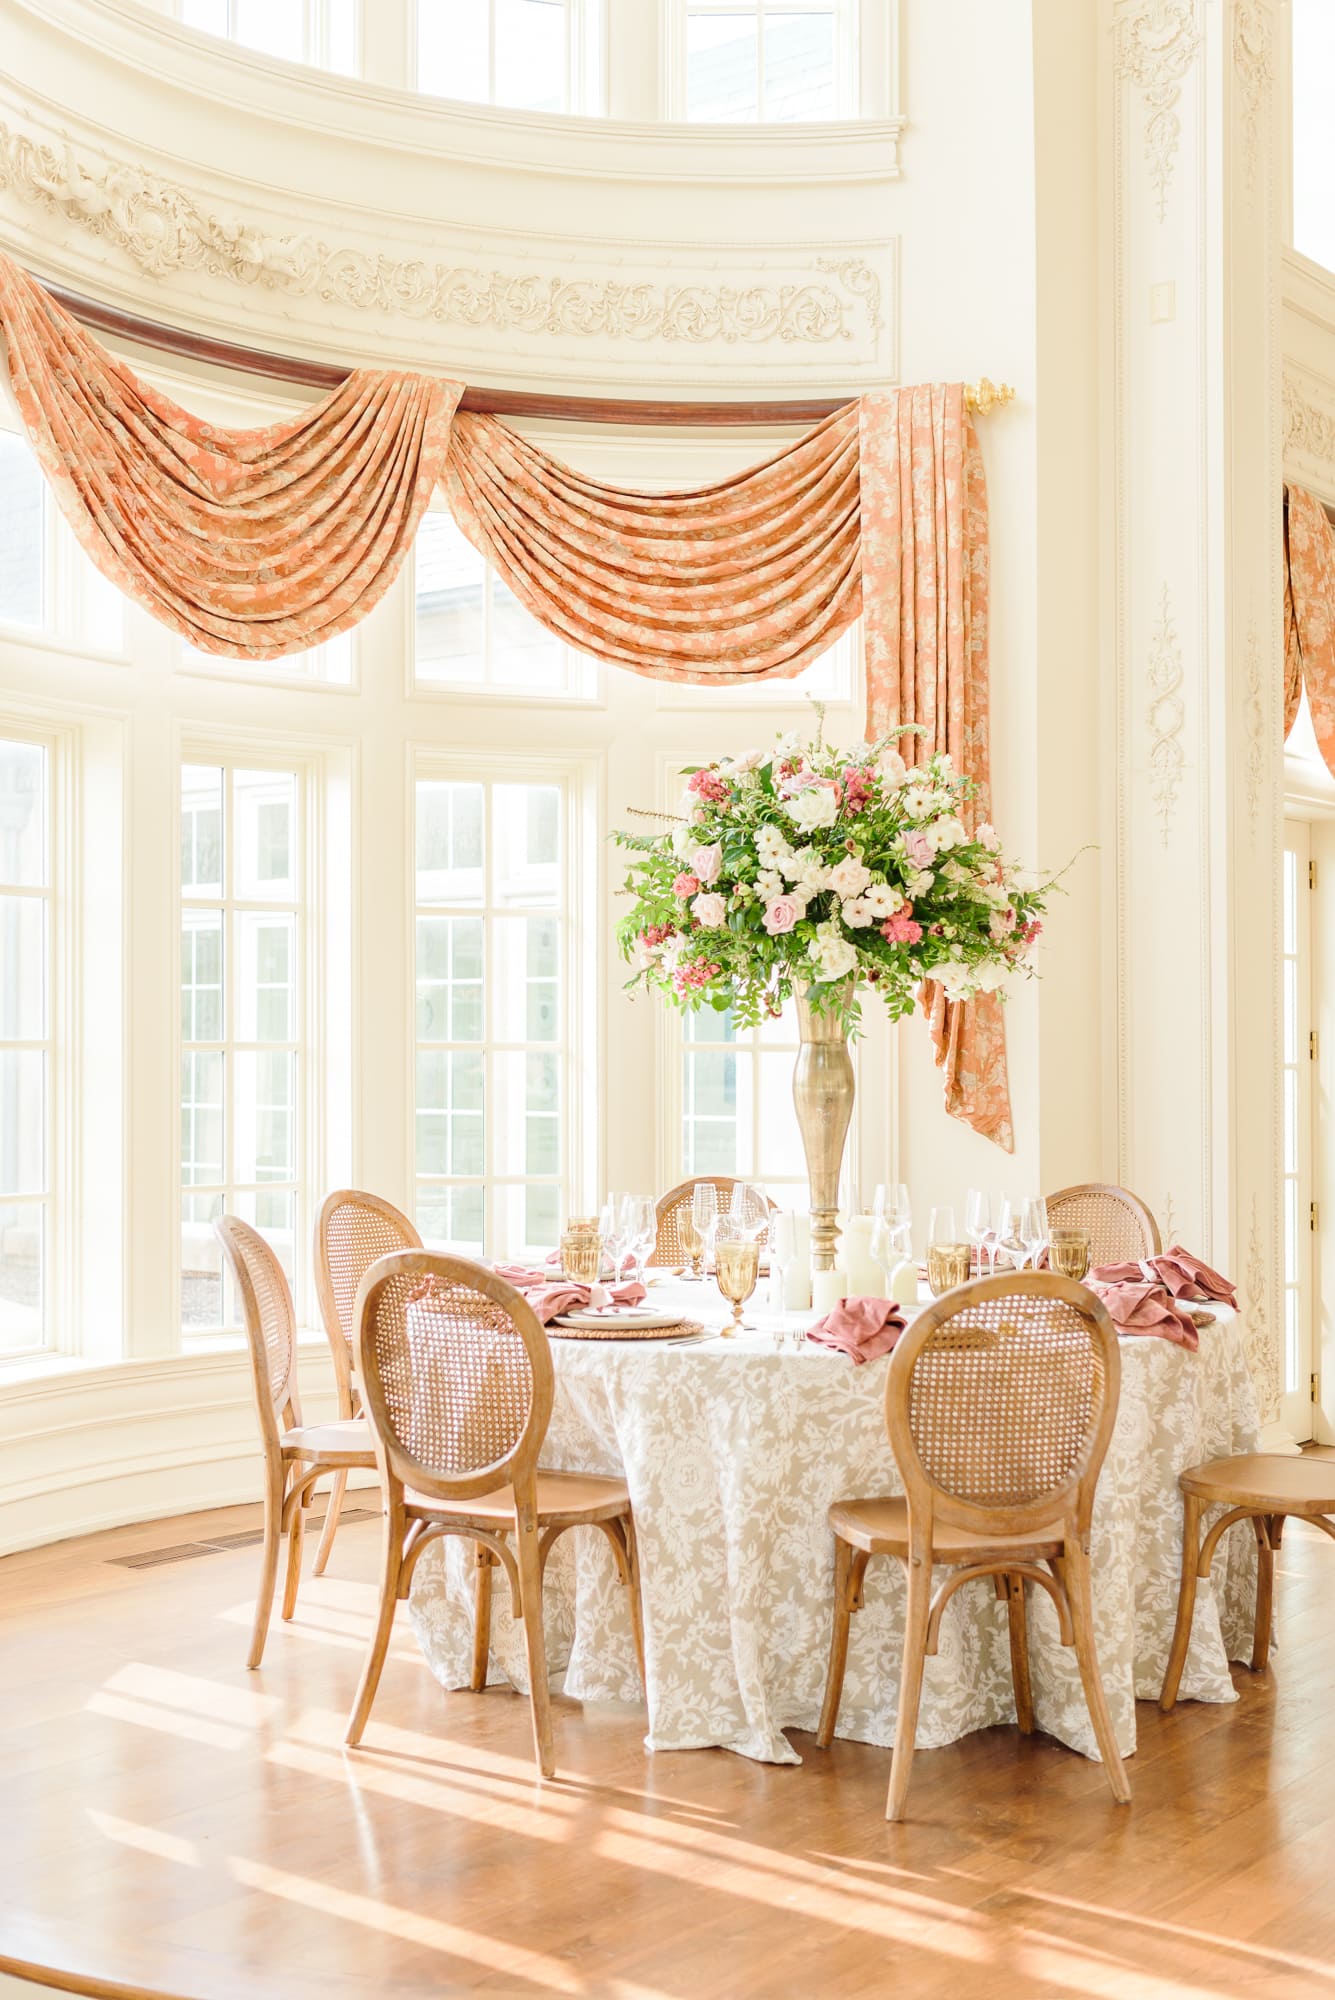 An elegant mansion wedding with a formal table setting in pink and orange.